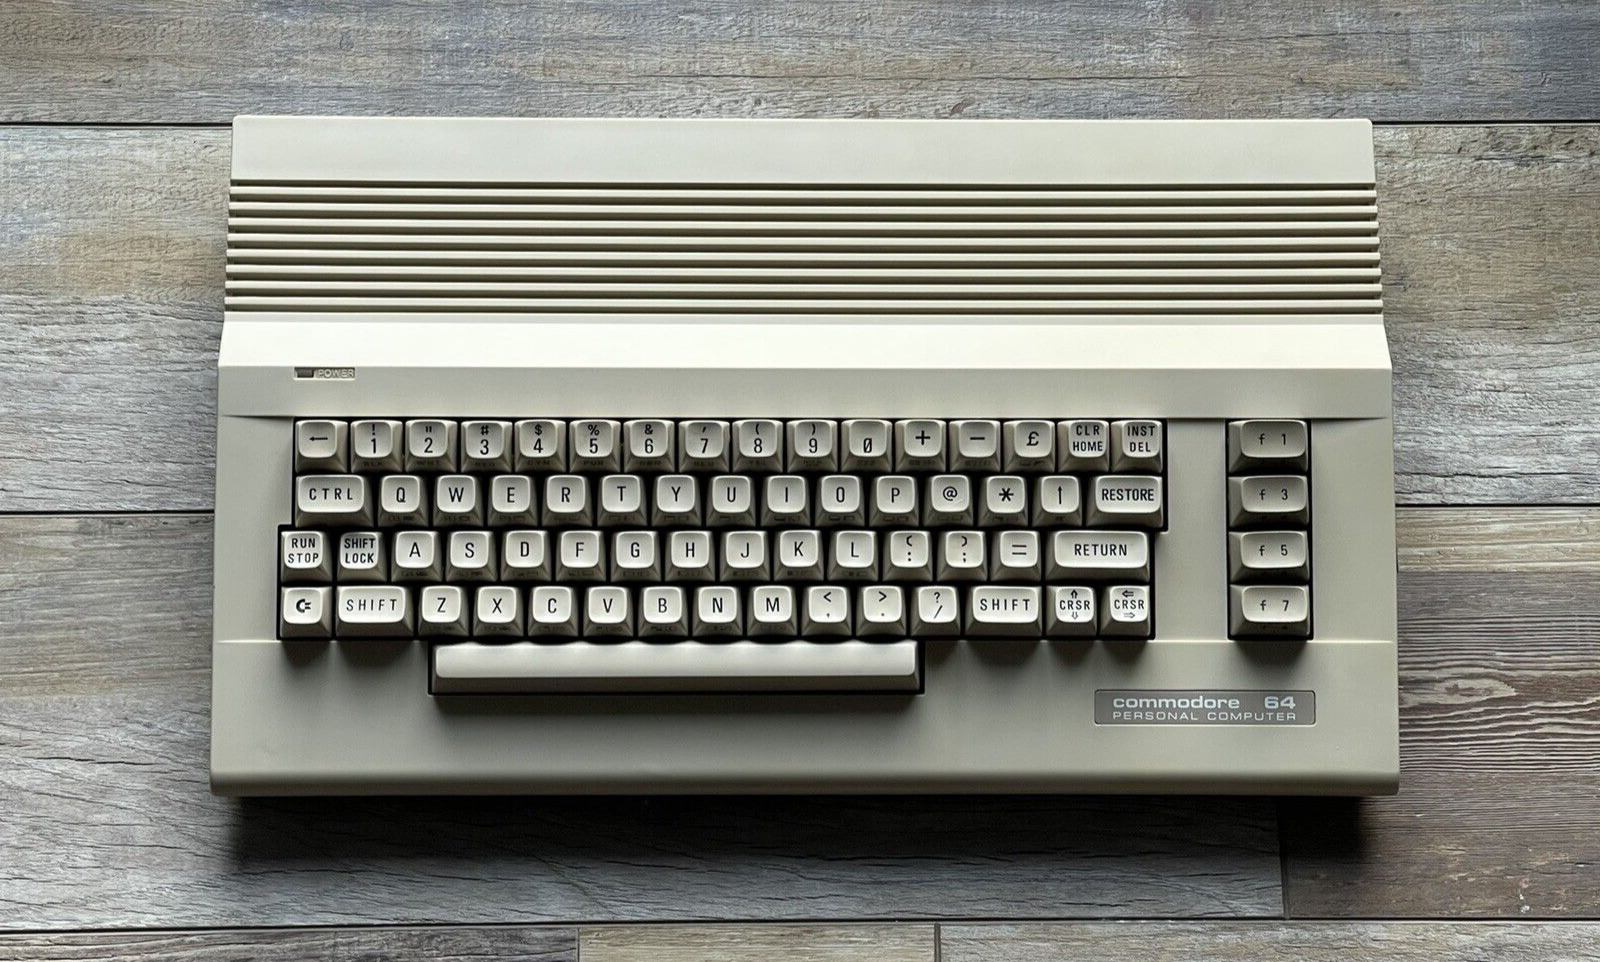 Professionally restored & fully recapped Commodore 64C computer | NTSC C64